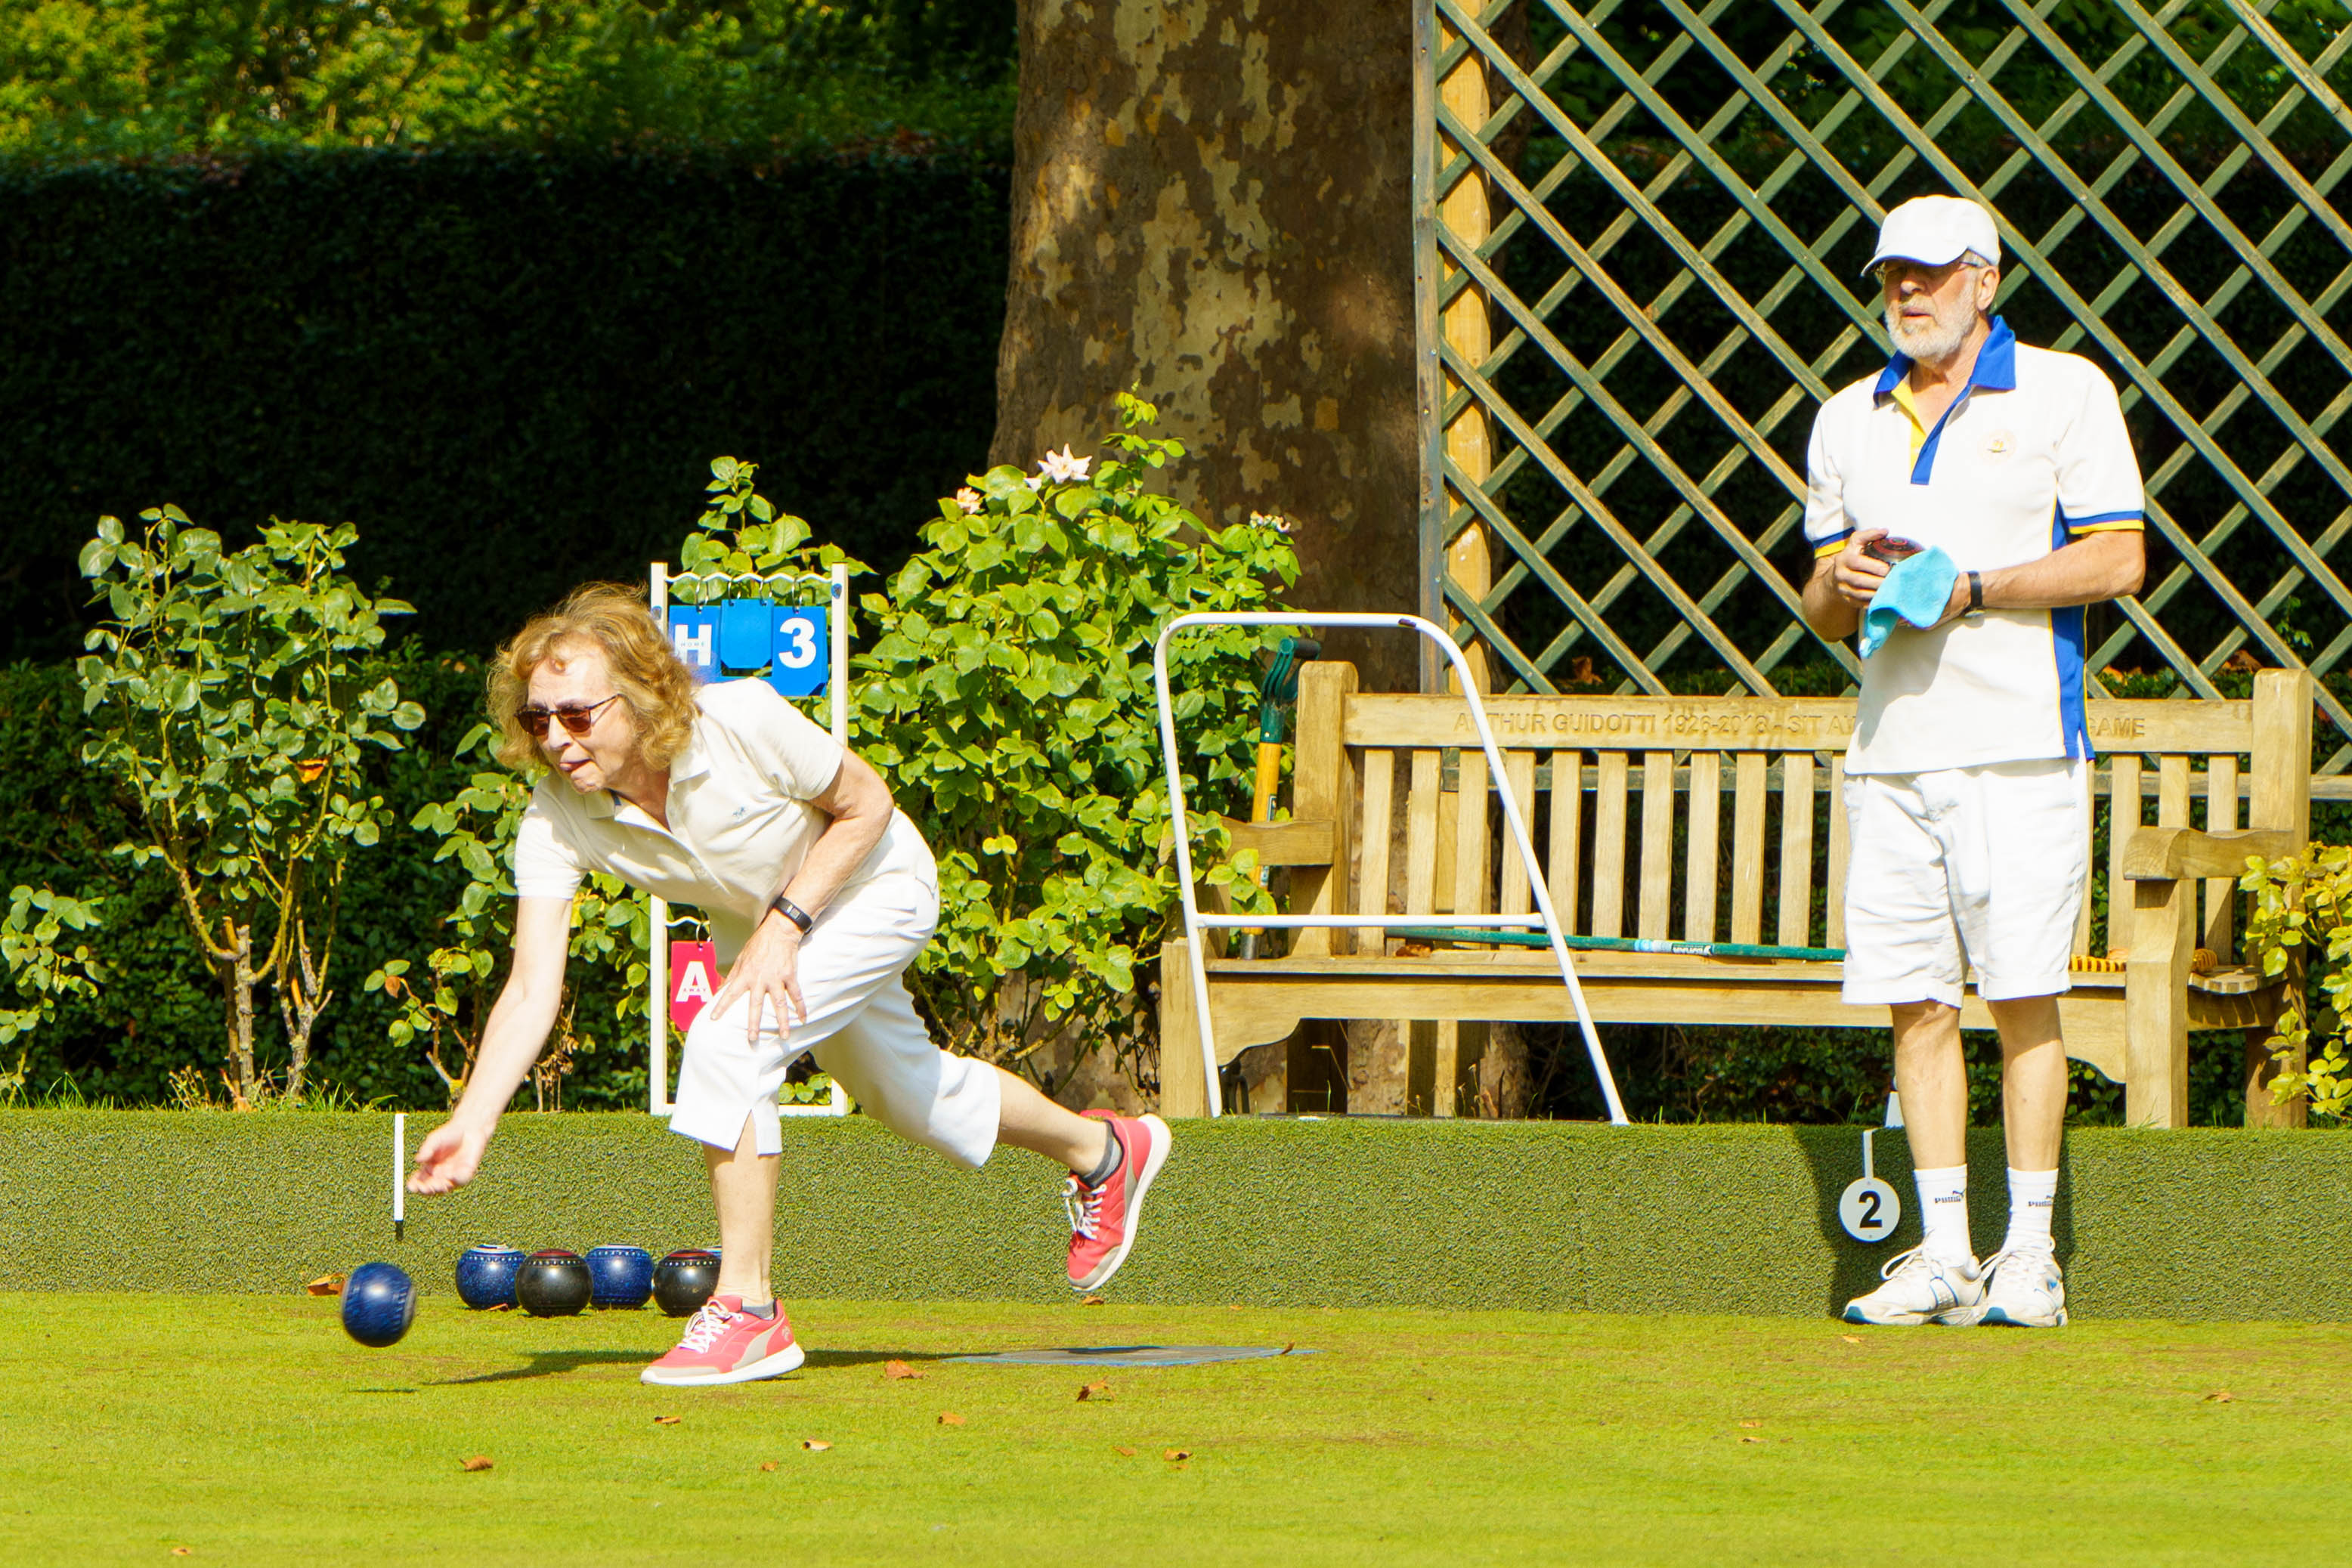 Francis Drake Bowls Club, Hilly Fields, Brockley, SE4 1QE. Gardiners Cup